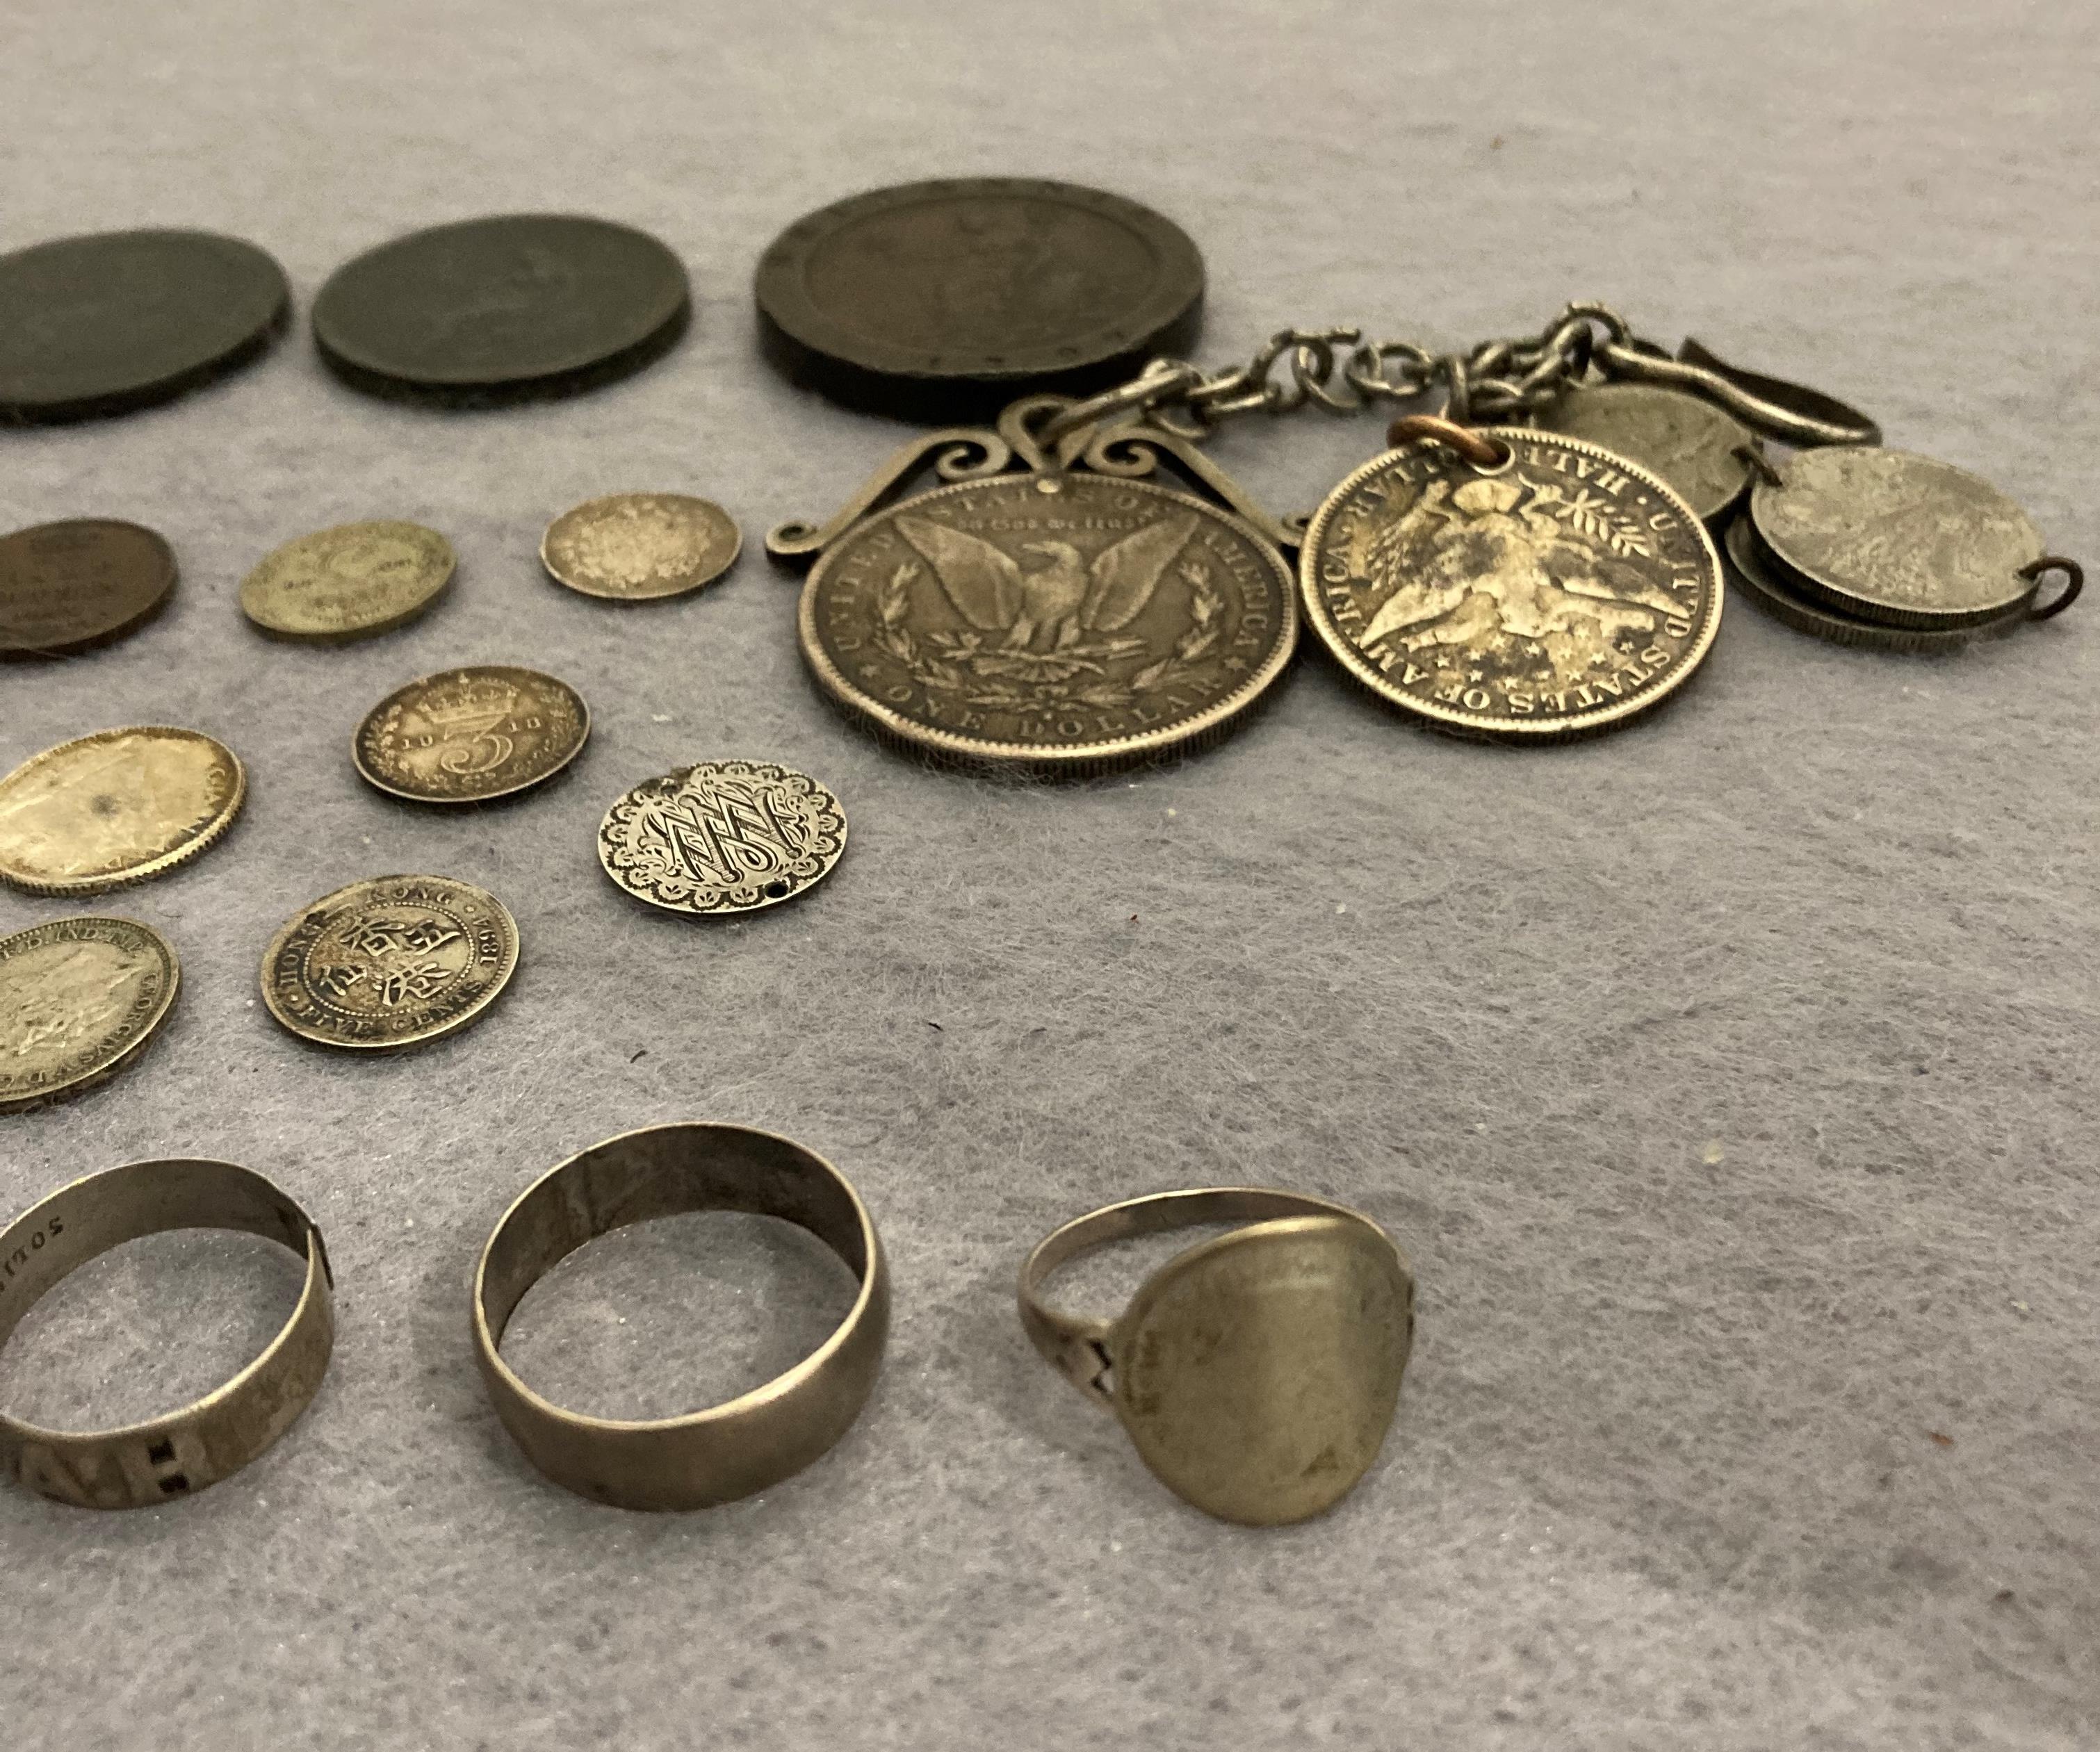 Contents to box - USA 1883 silver US dollar on chain with other silver coins, - Image 3 of 4